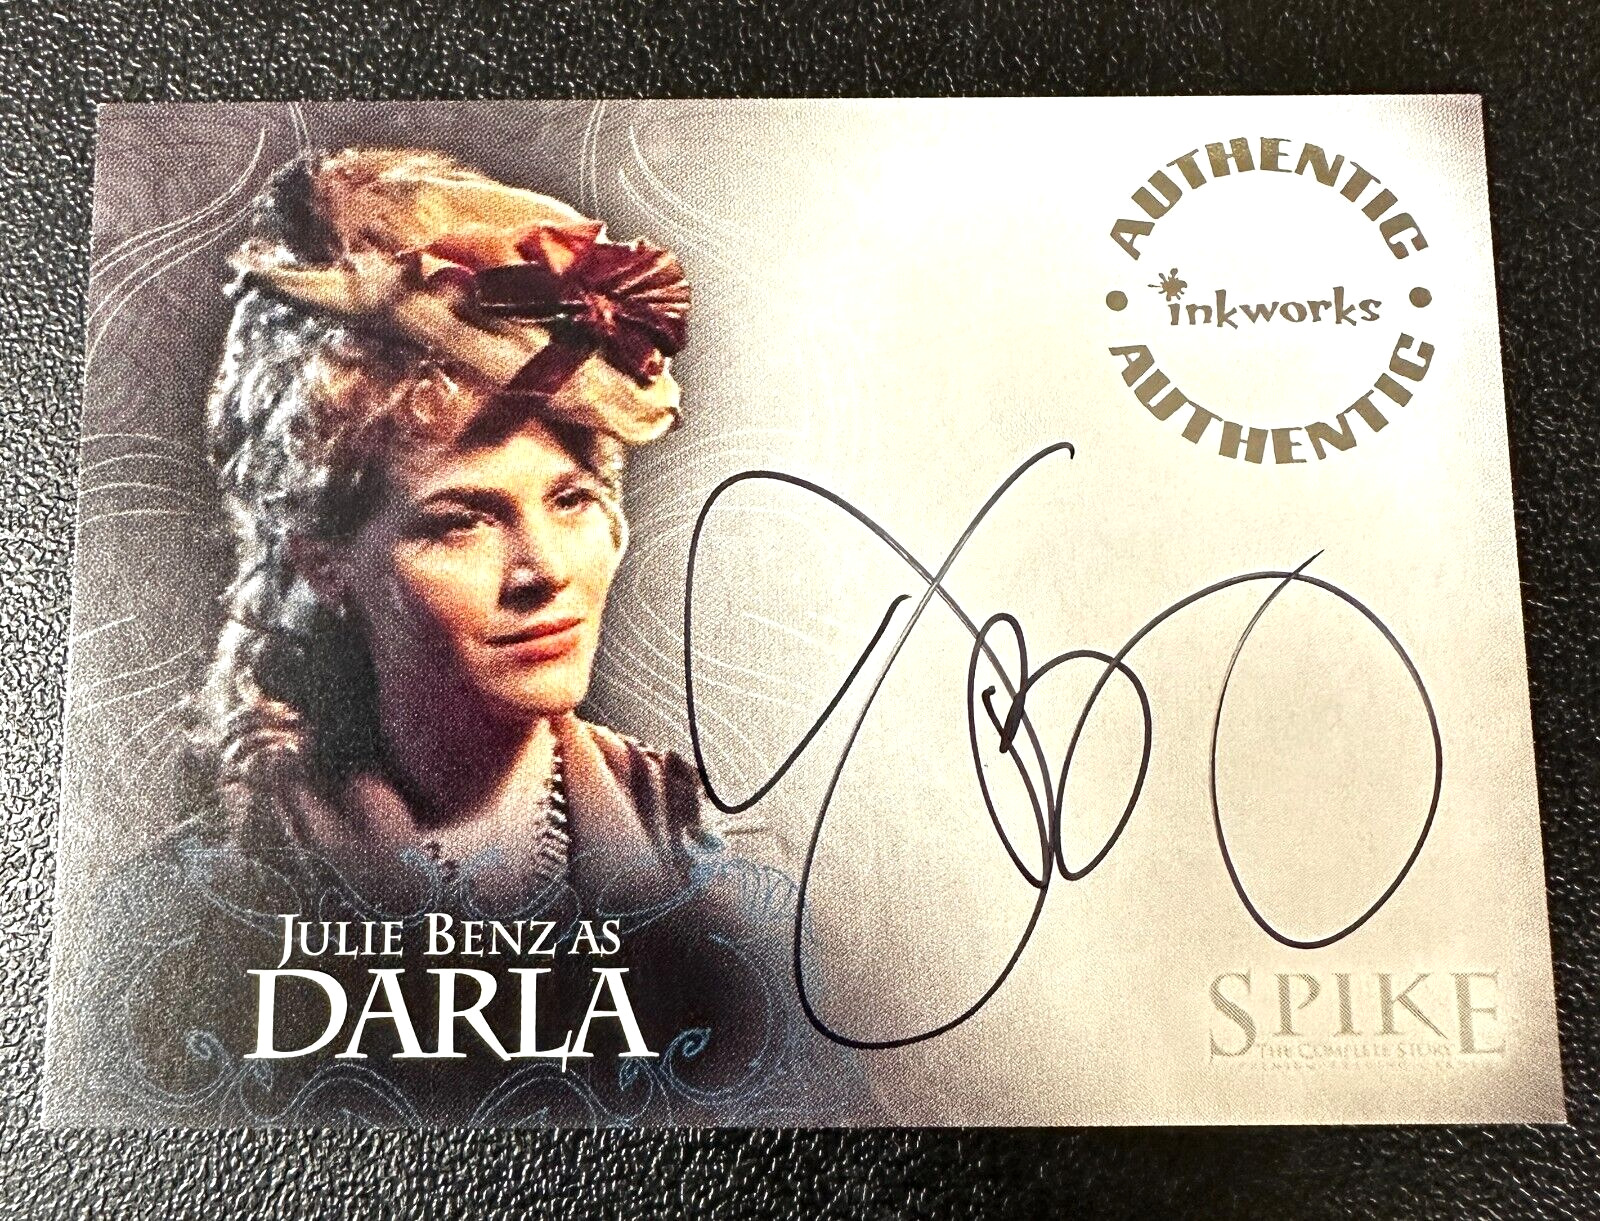 2005 Spike The Complete Story Autograph Card Signed by Julie Benz from Inkworks